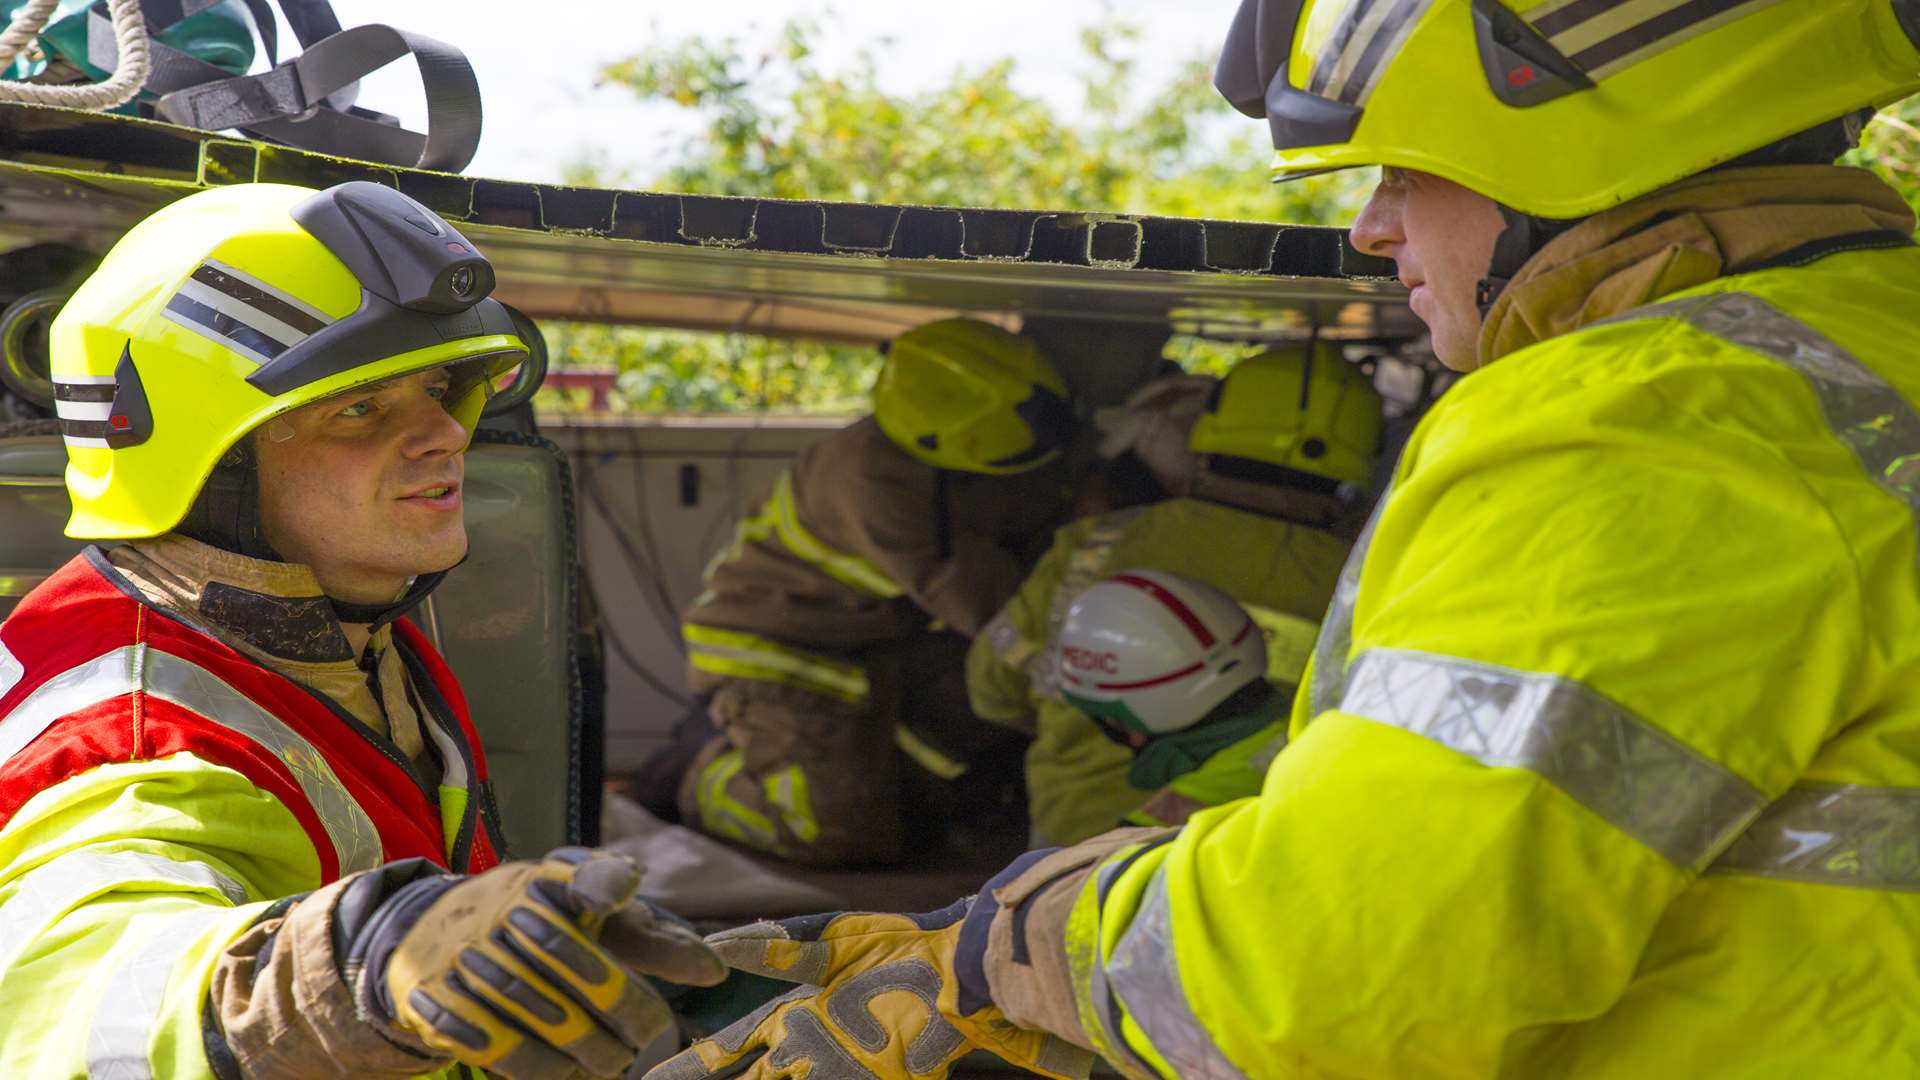 The training exercise tested firefighters' skills